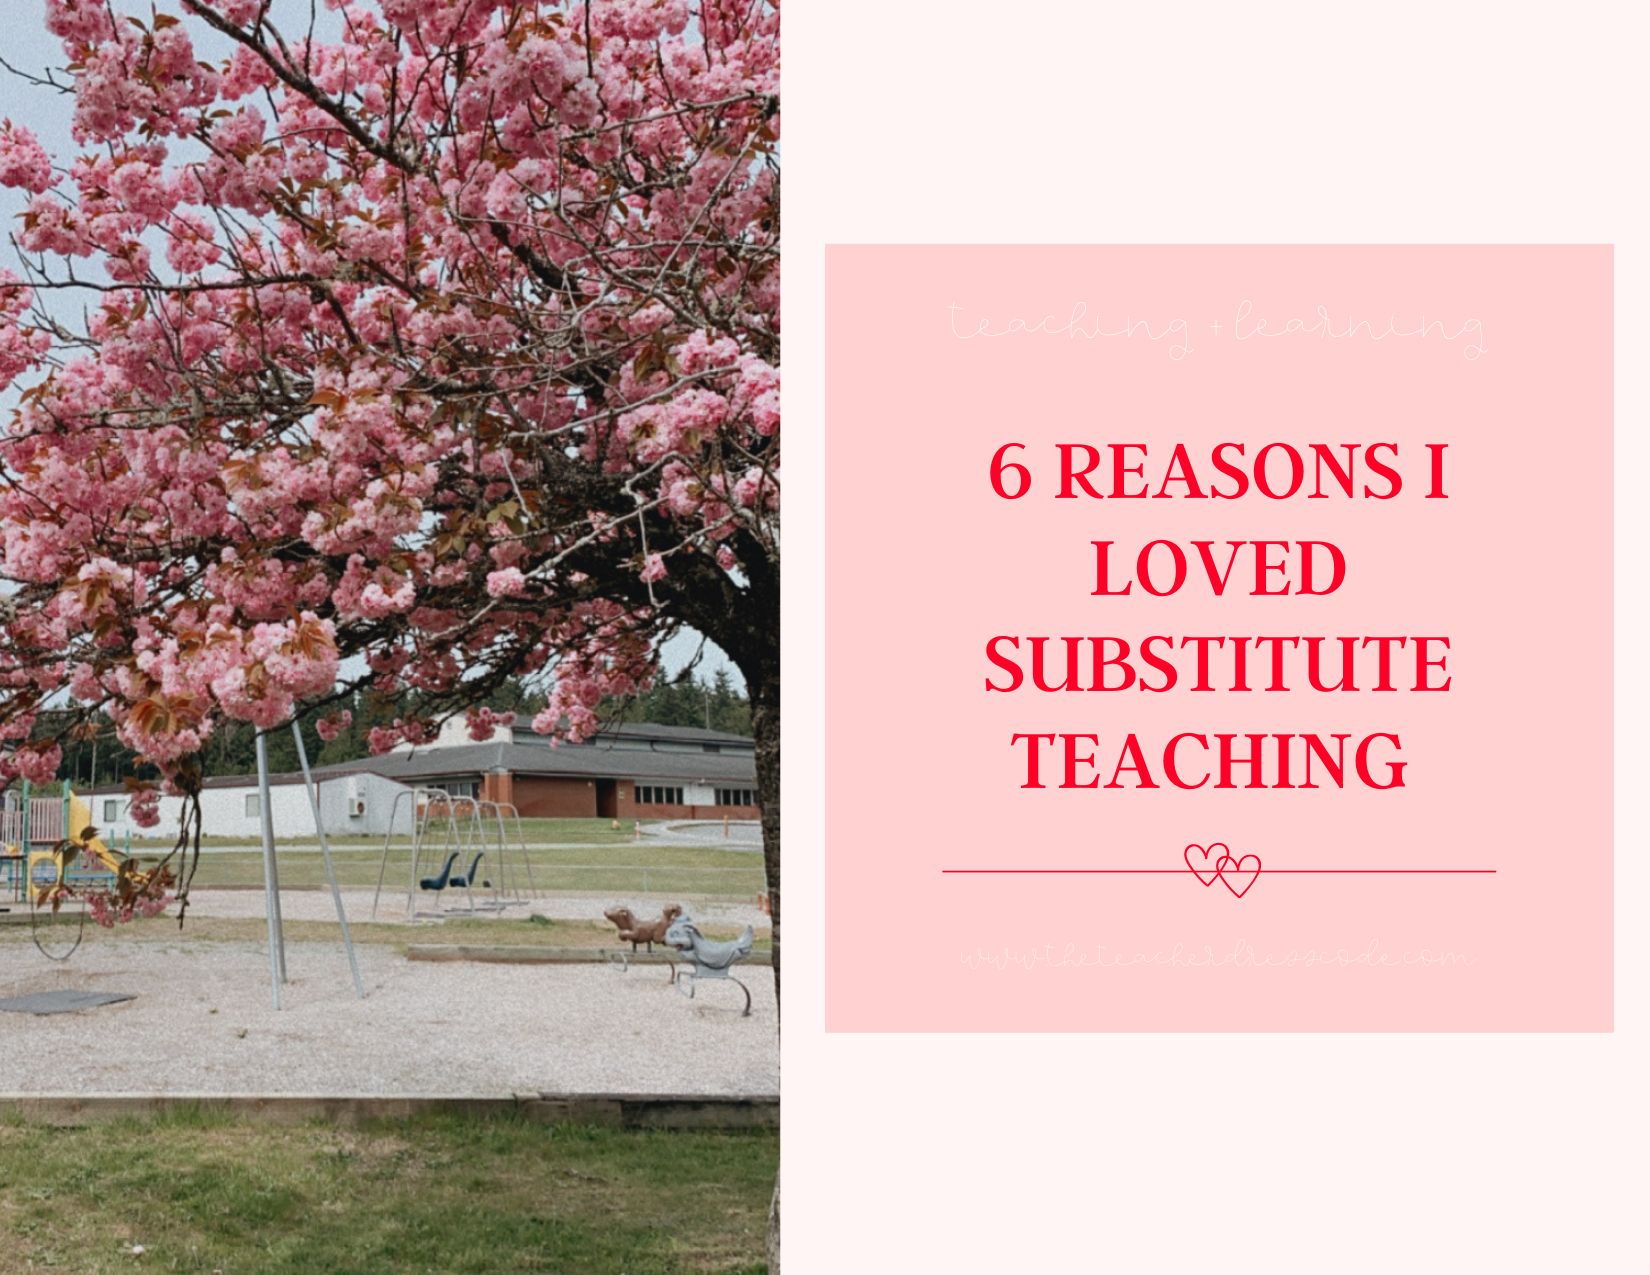 Trying to figure out if substitute teaching is the right career move for you? 6 reasons why I loved substitute teaching after a year of being on leave.